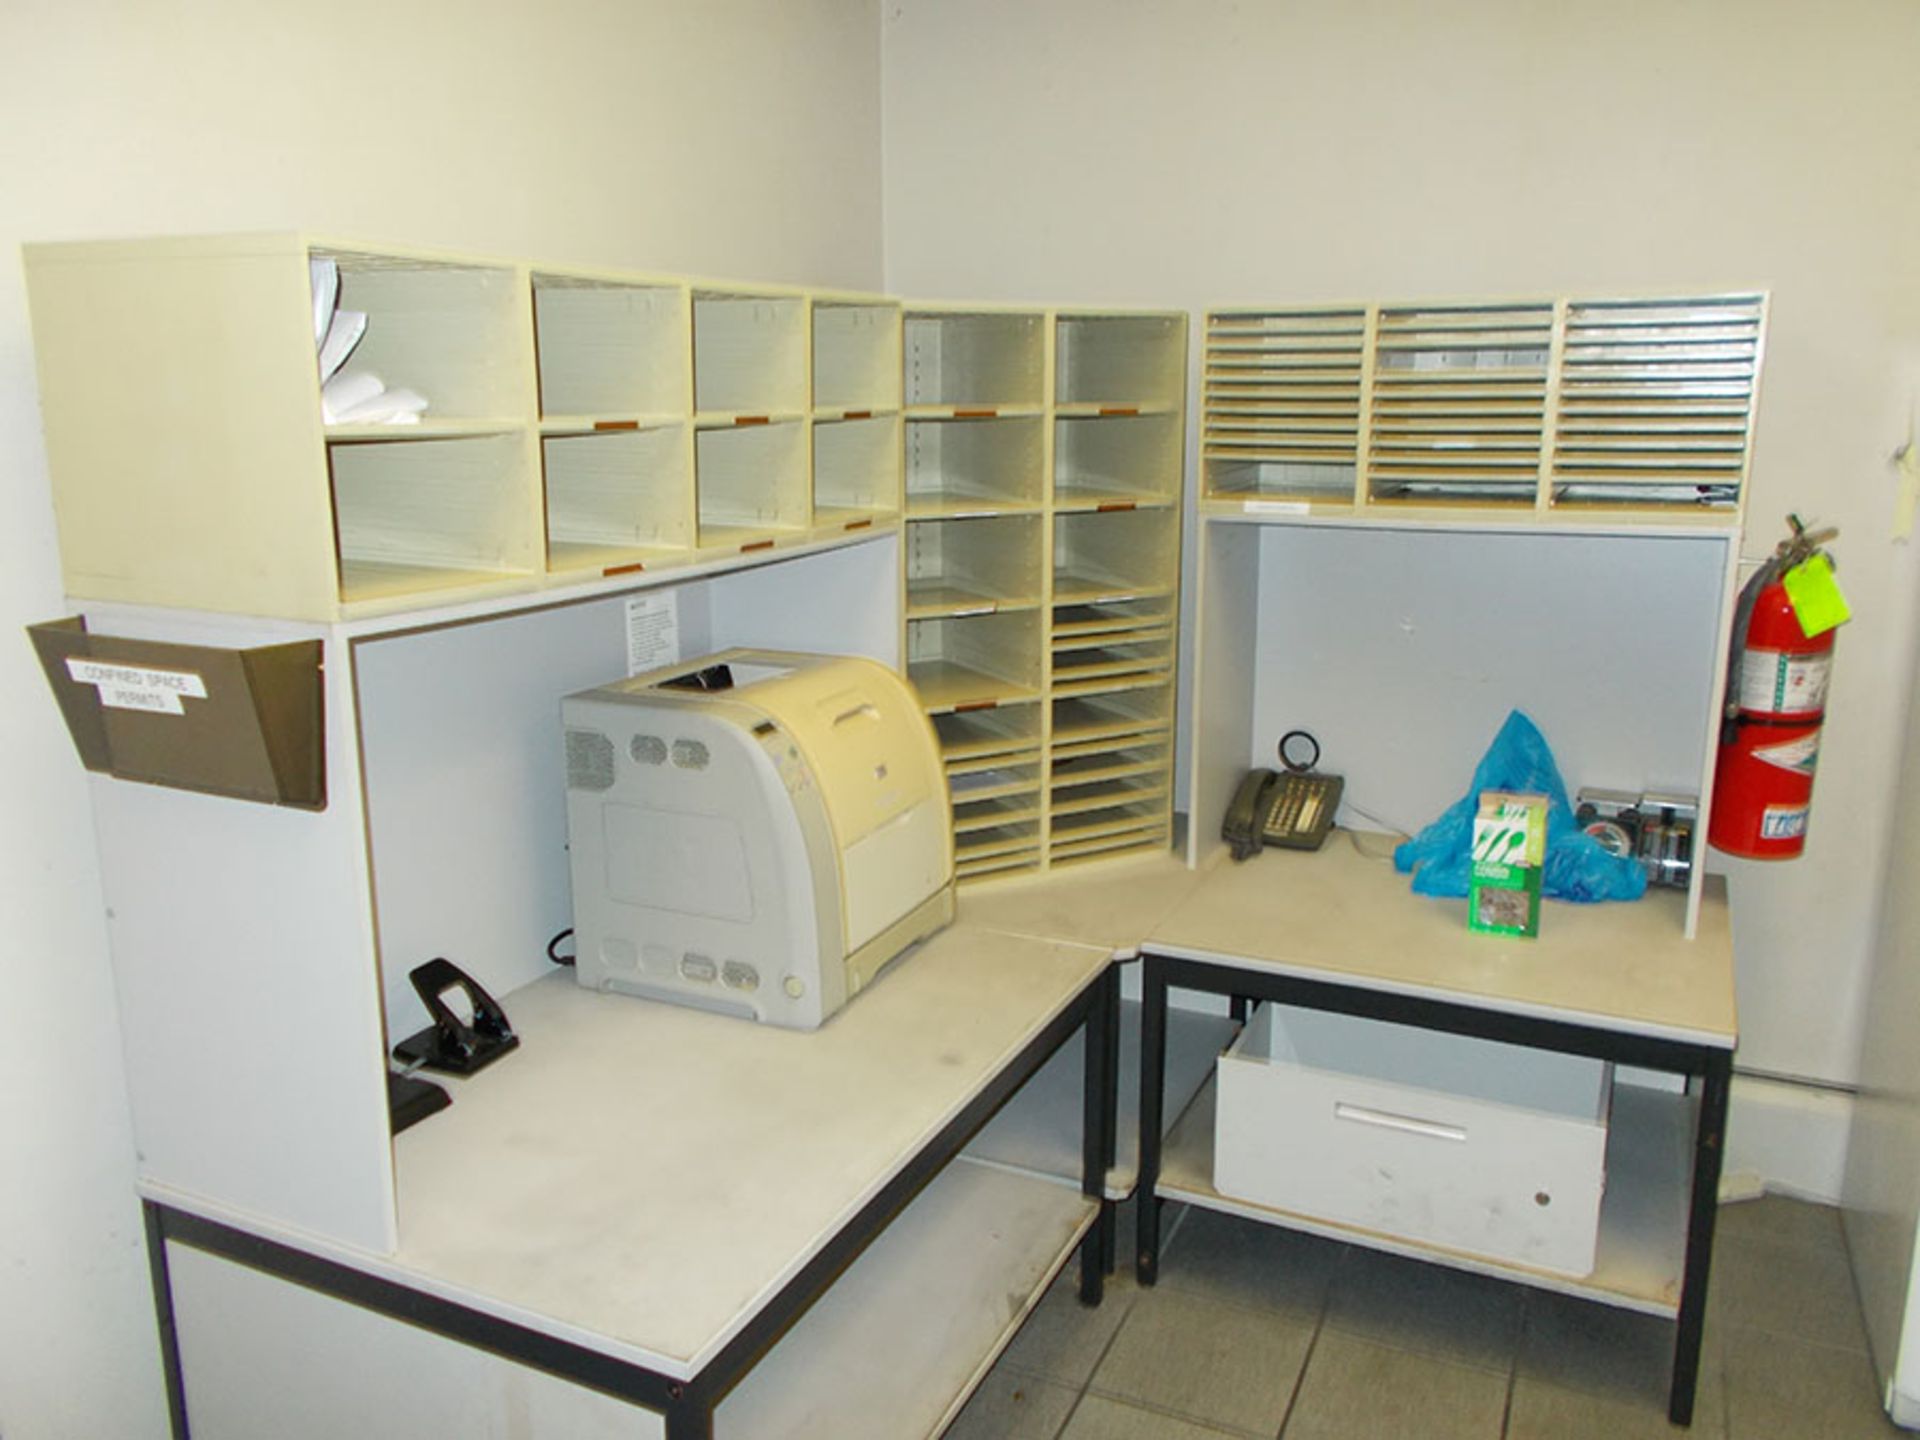 CONTENTS OF ROOM; CABINETS, TABLES, LASER PRINTER, REFRIGERATOR, AND MISC. ITEMS